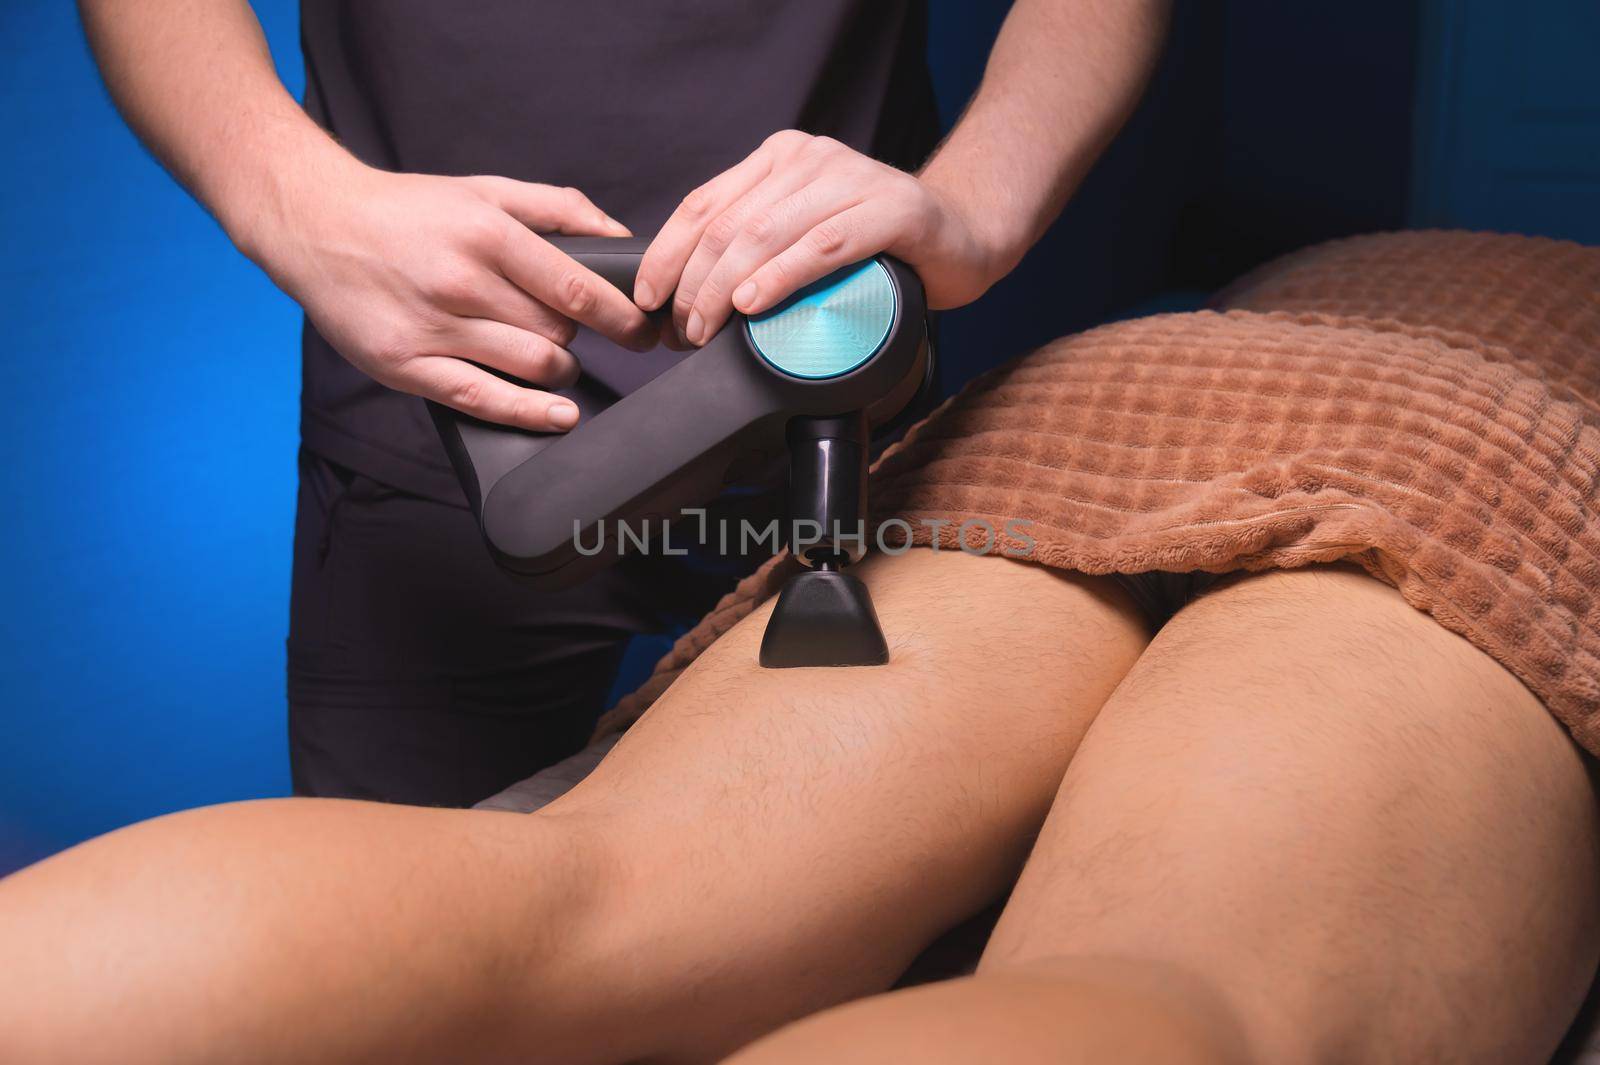 Close-up percussion thigh massage with a special electric device by yanik88